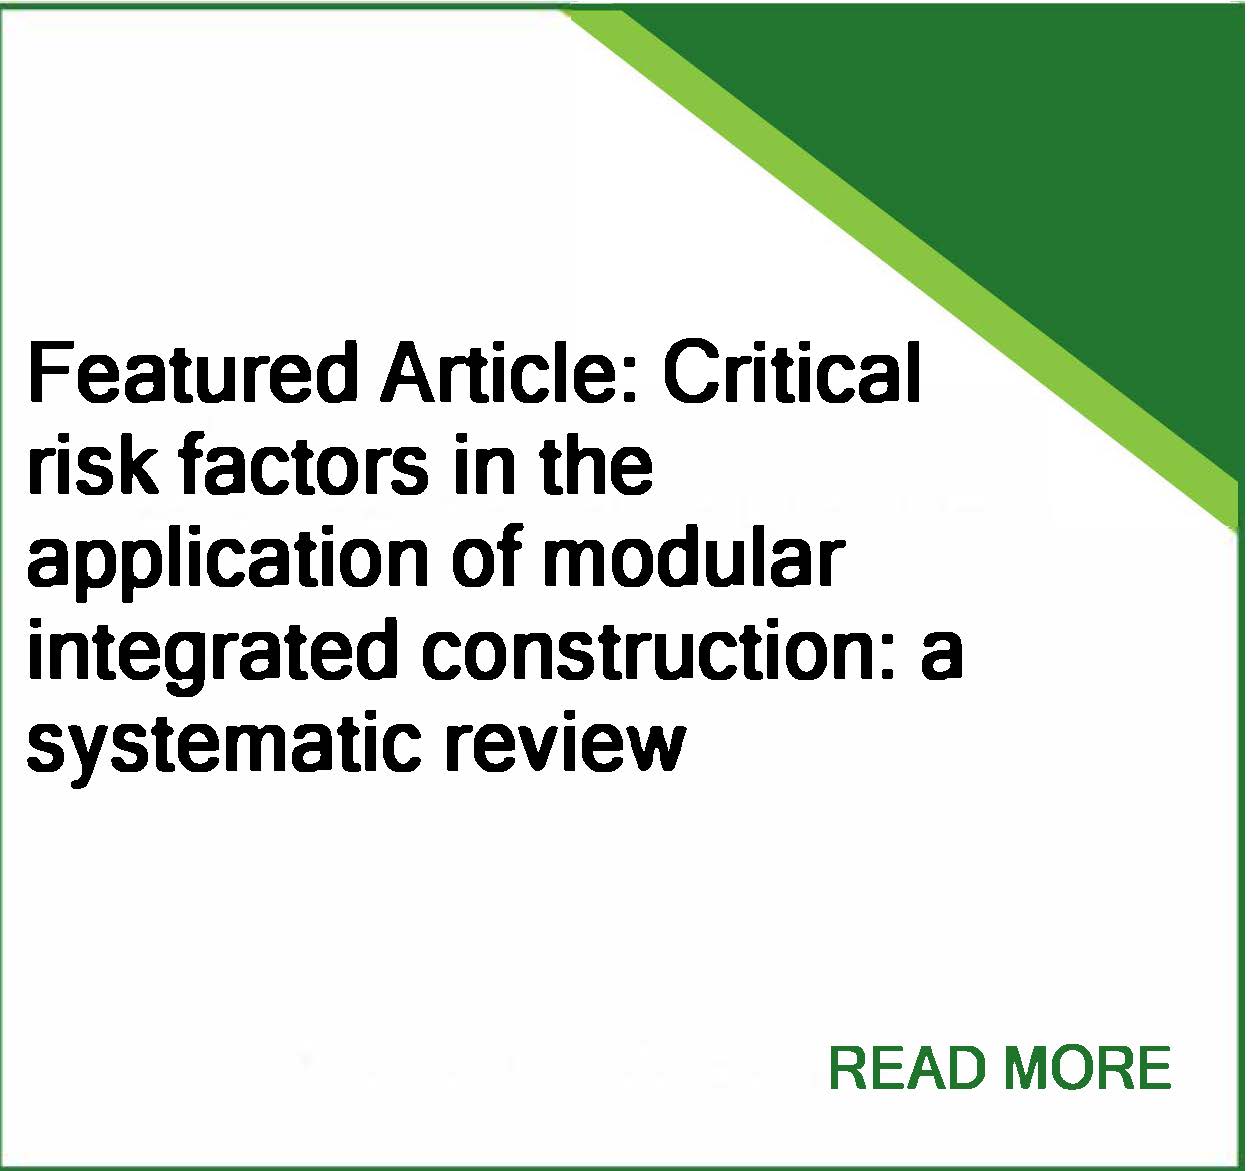 Featured article ‘Critical risk factors in the application of modular integrated construction: a systematic review’